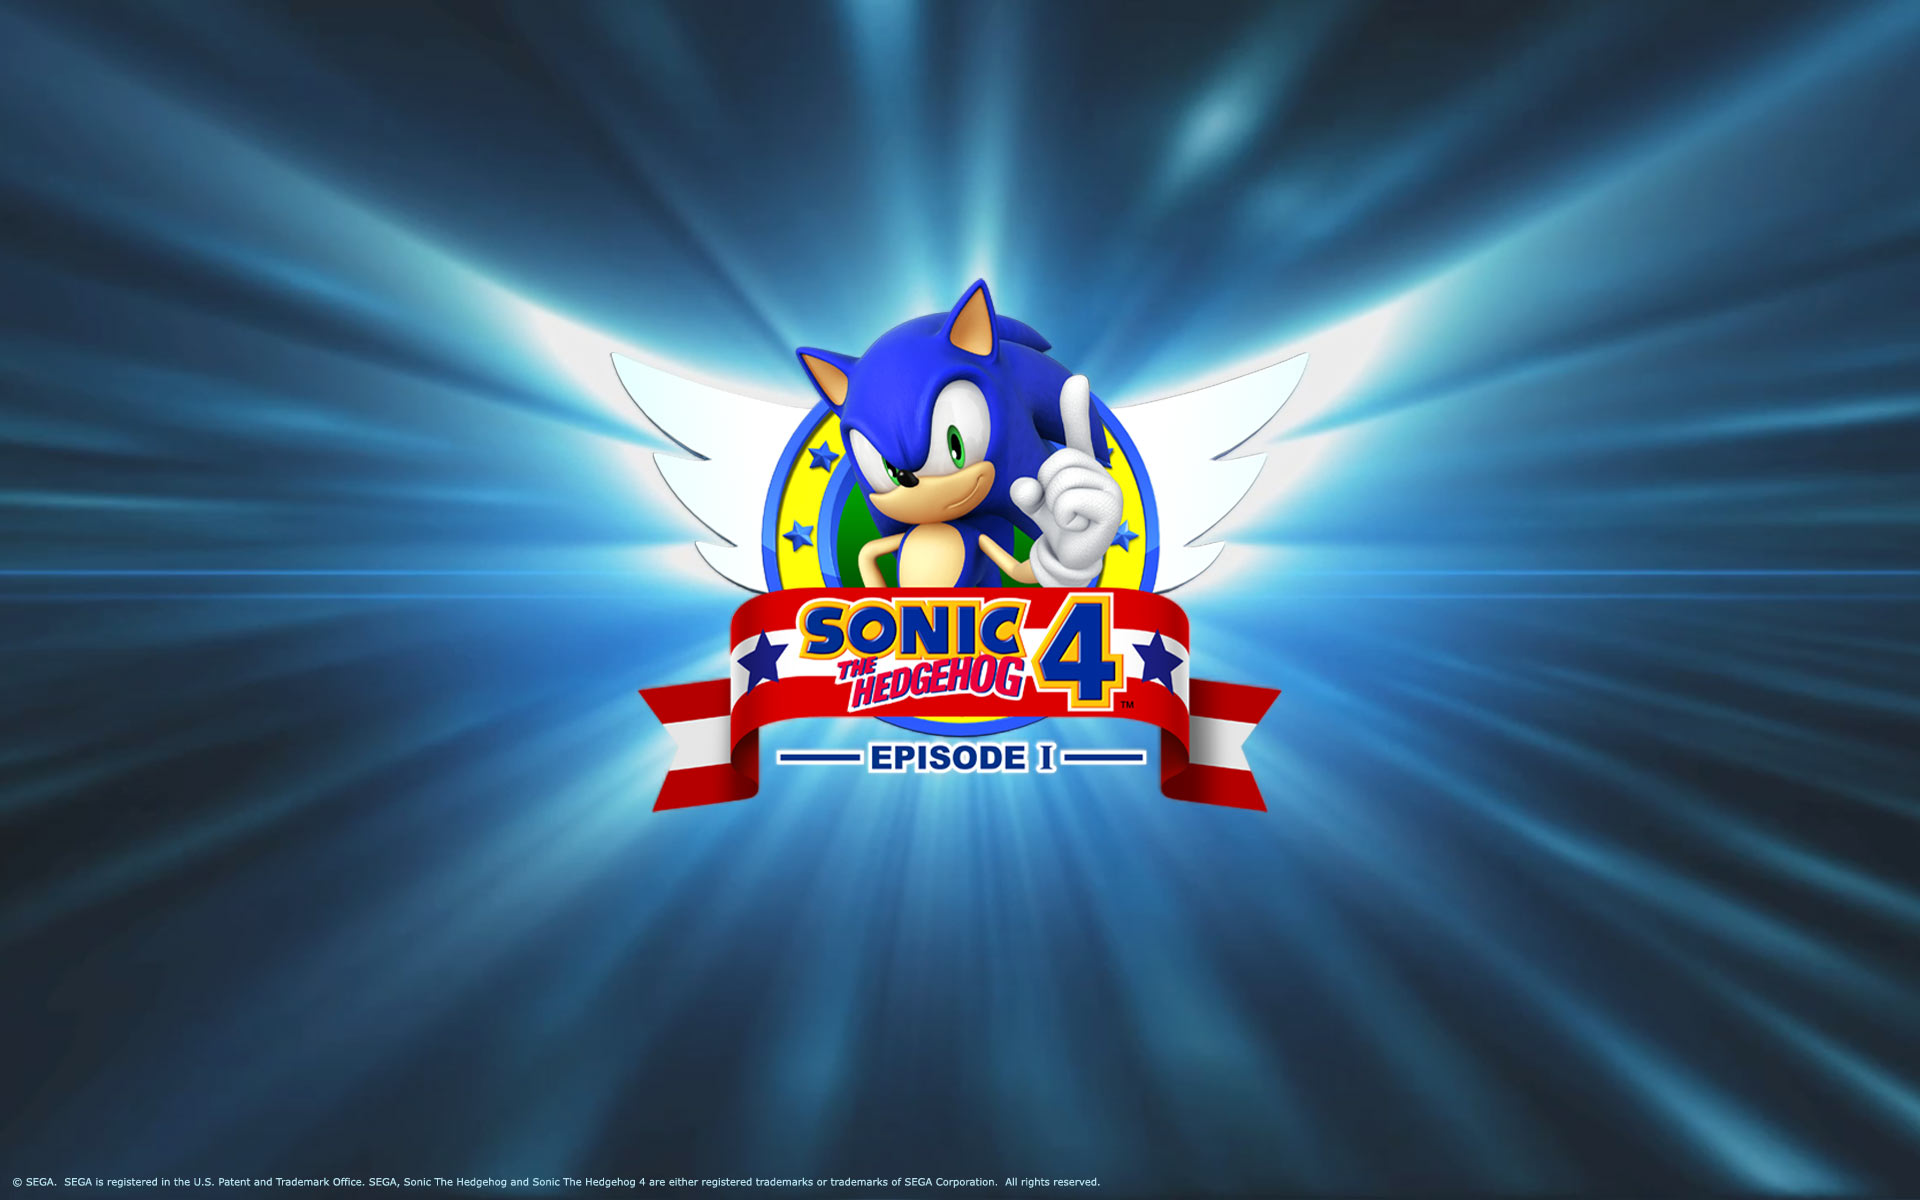 Sonic 3 hd download